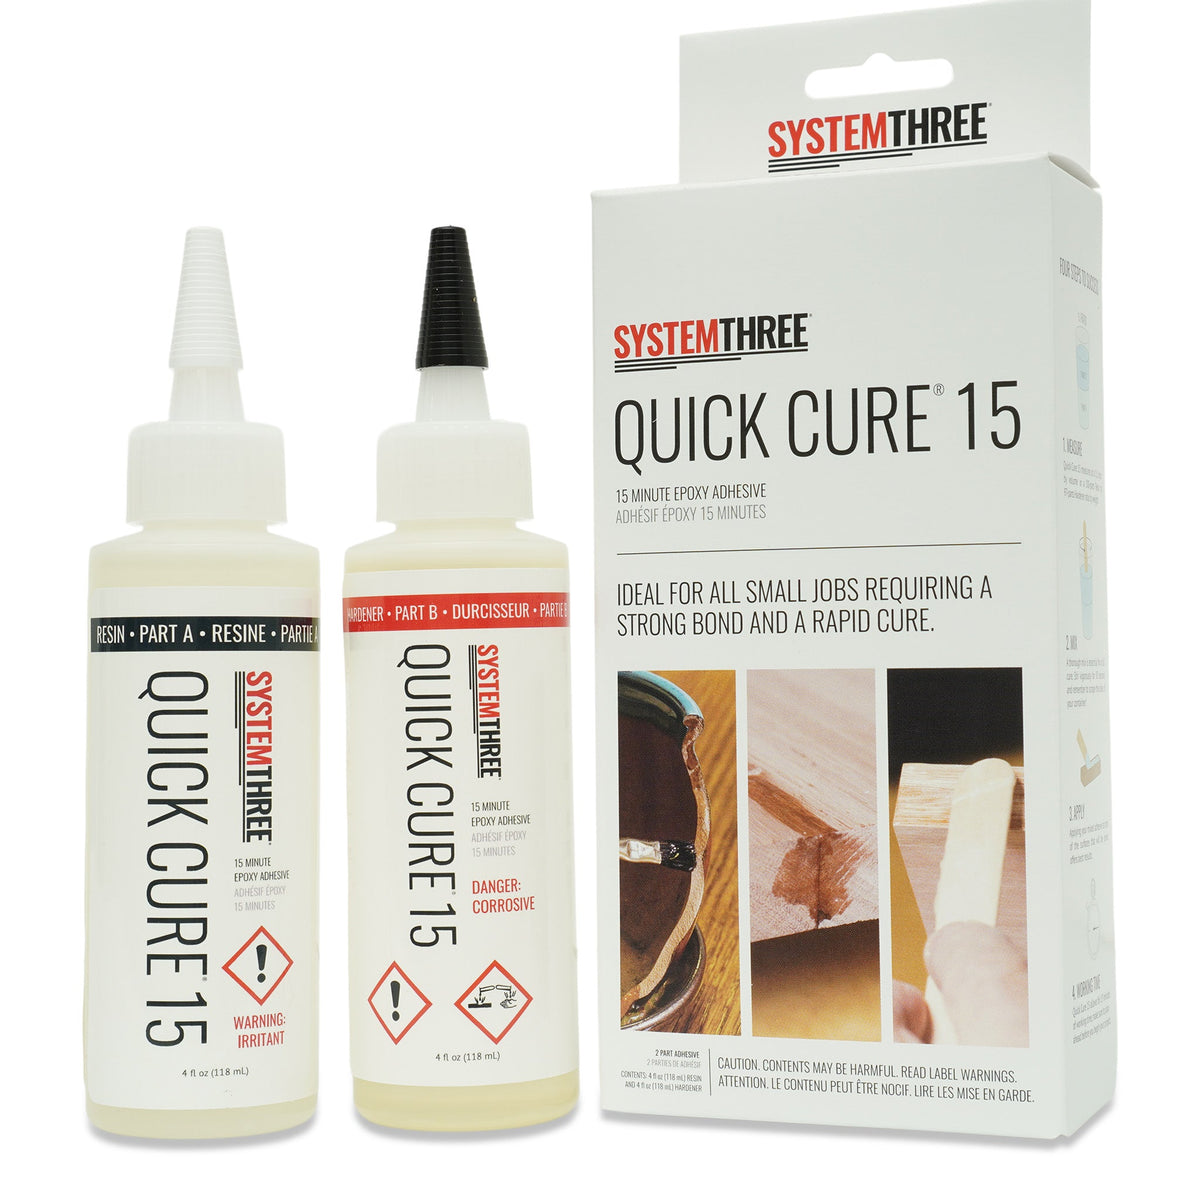 How to use quick curing resin 